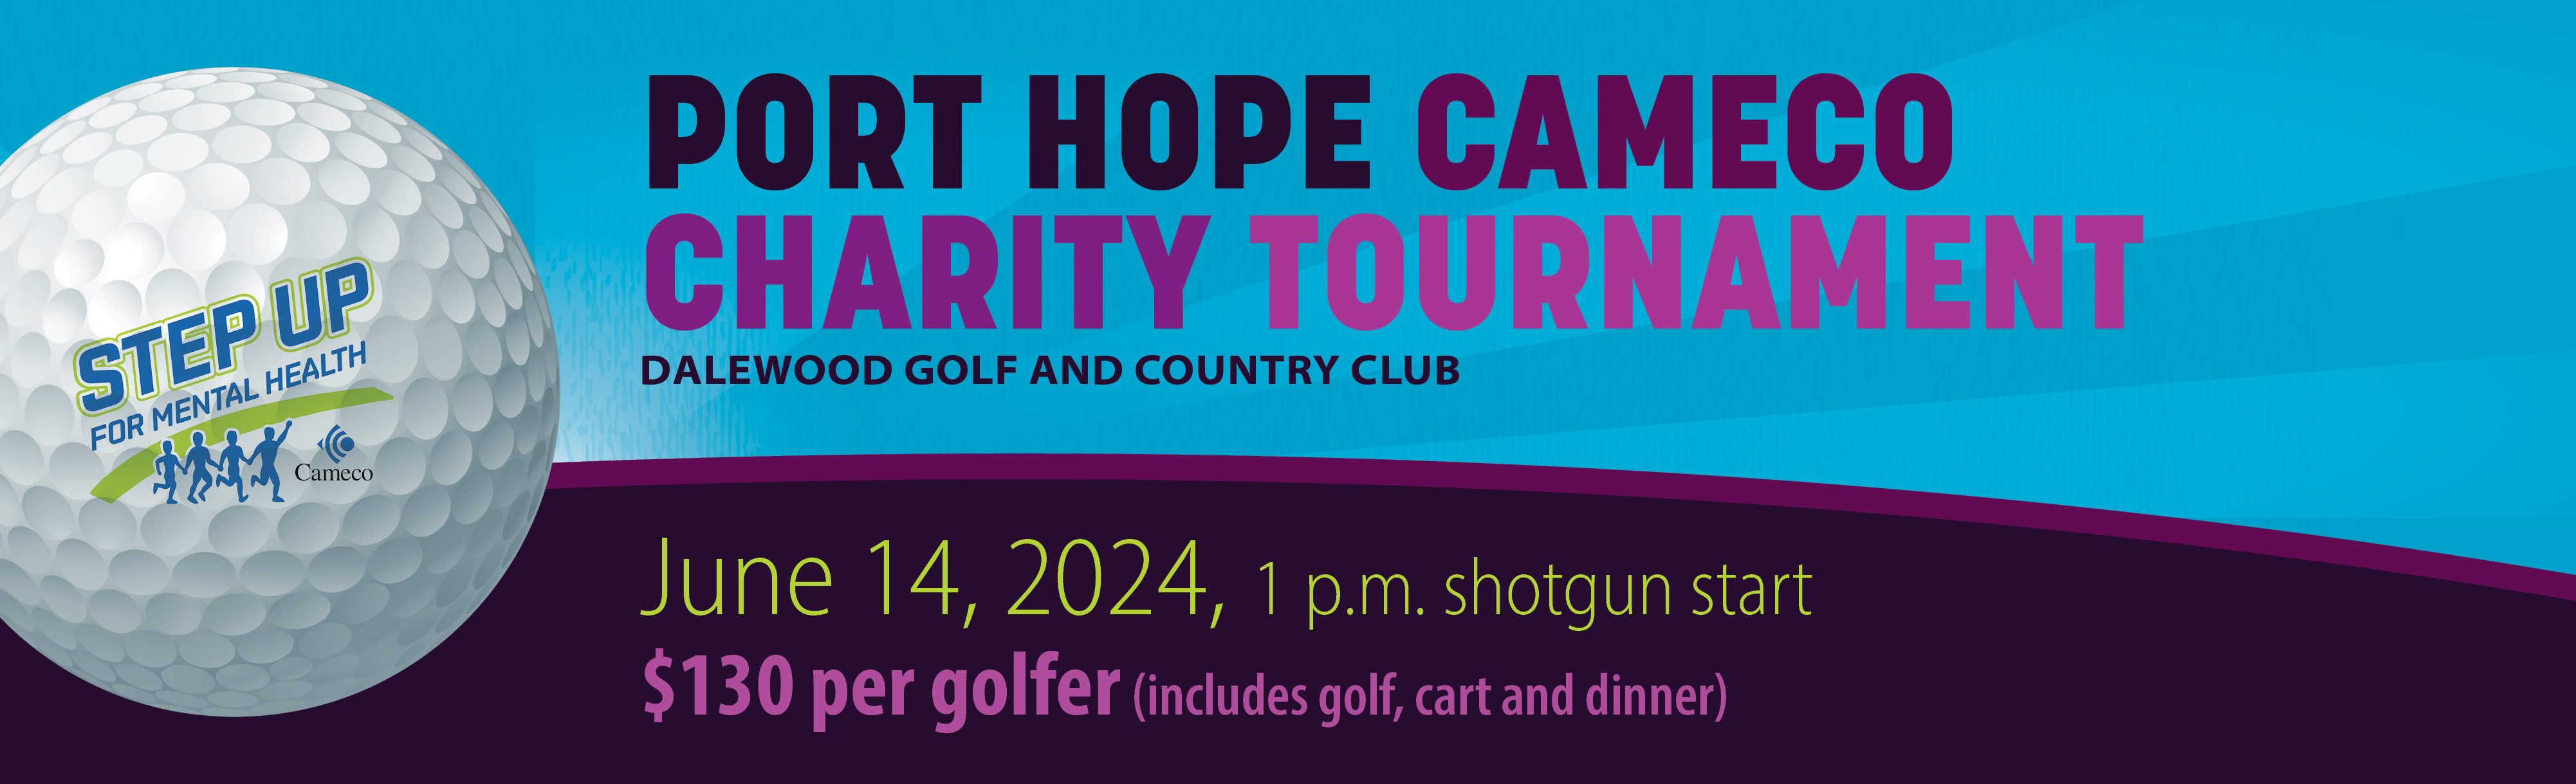 Port Hope Cameco Charity Golf Tournament